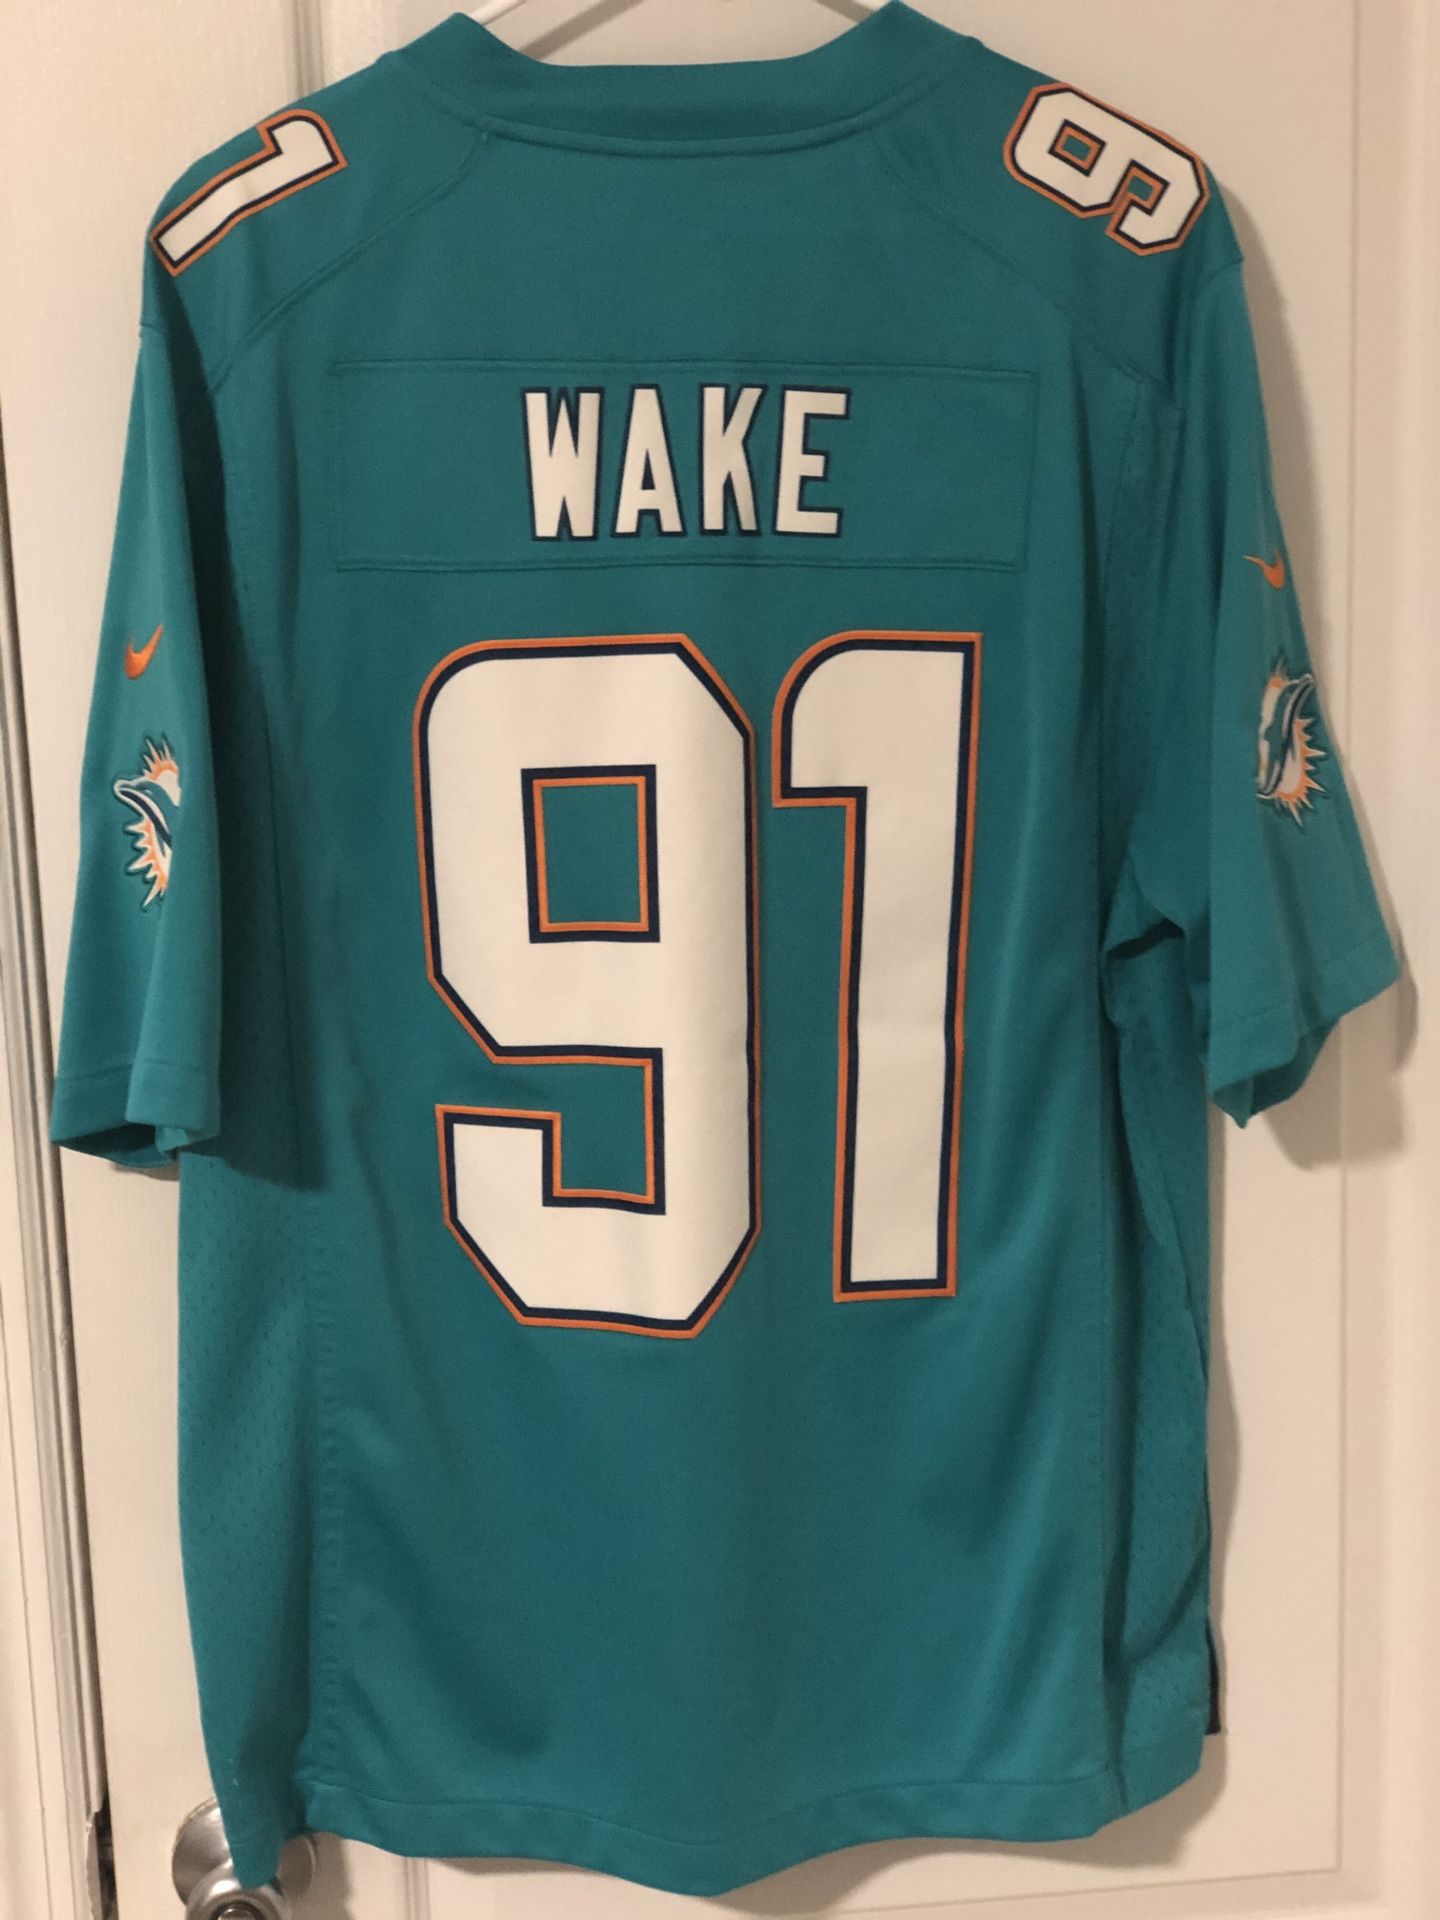 Miami Dolphins On Field Jersey 91 Cameron Wake. Size Large